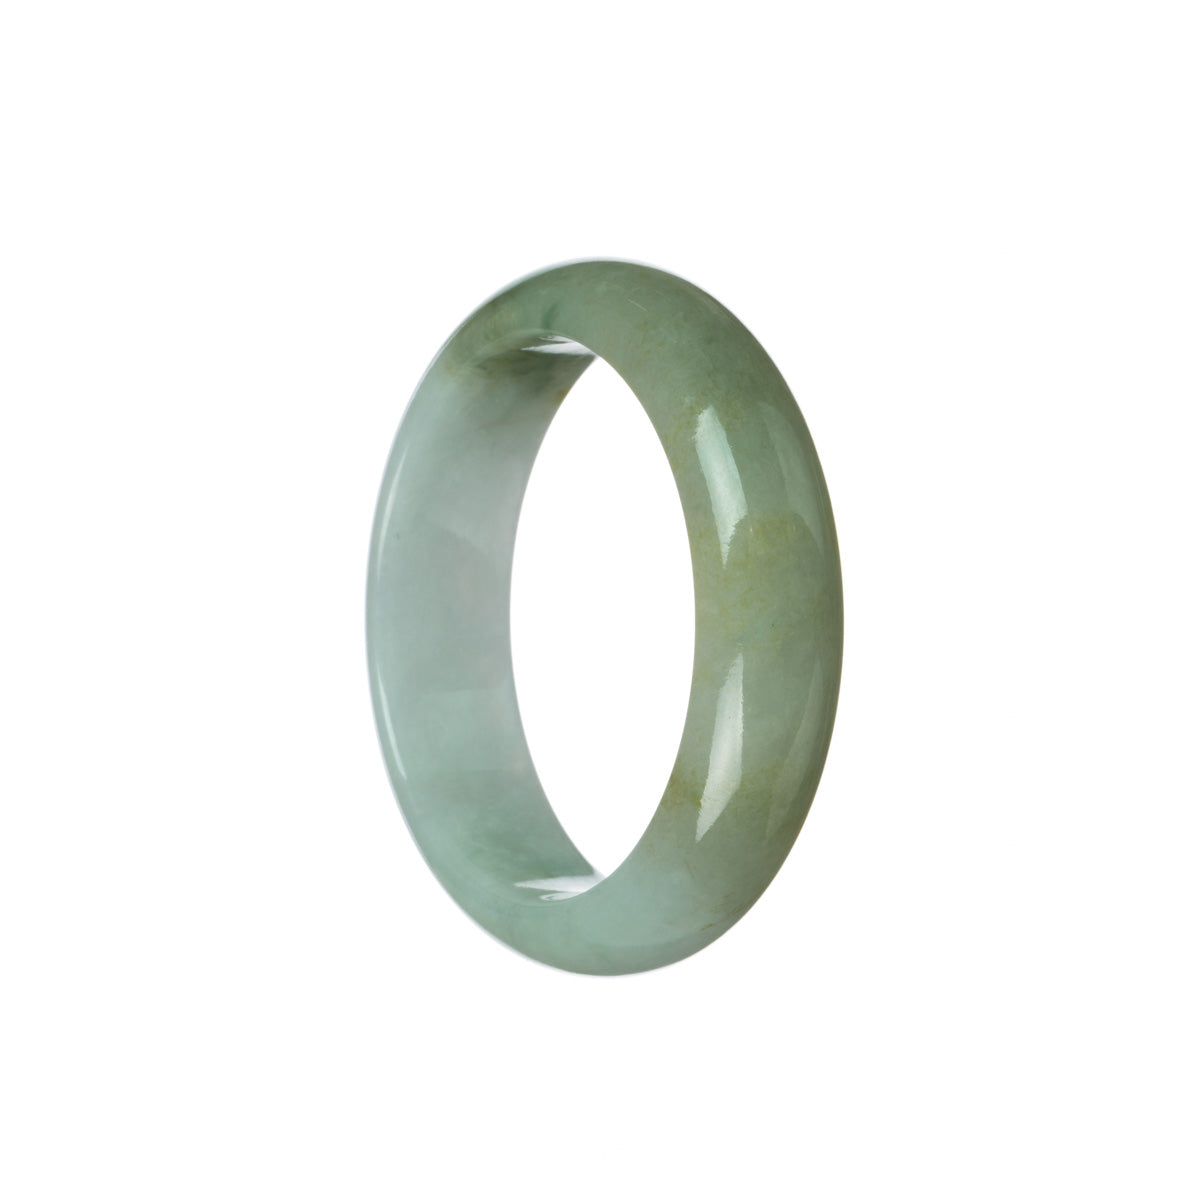 Authentic Grade A Green with pale lavender Burmese Jade Bangle - 53mm Half Moon